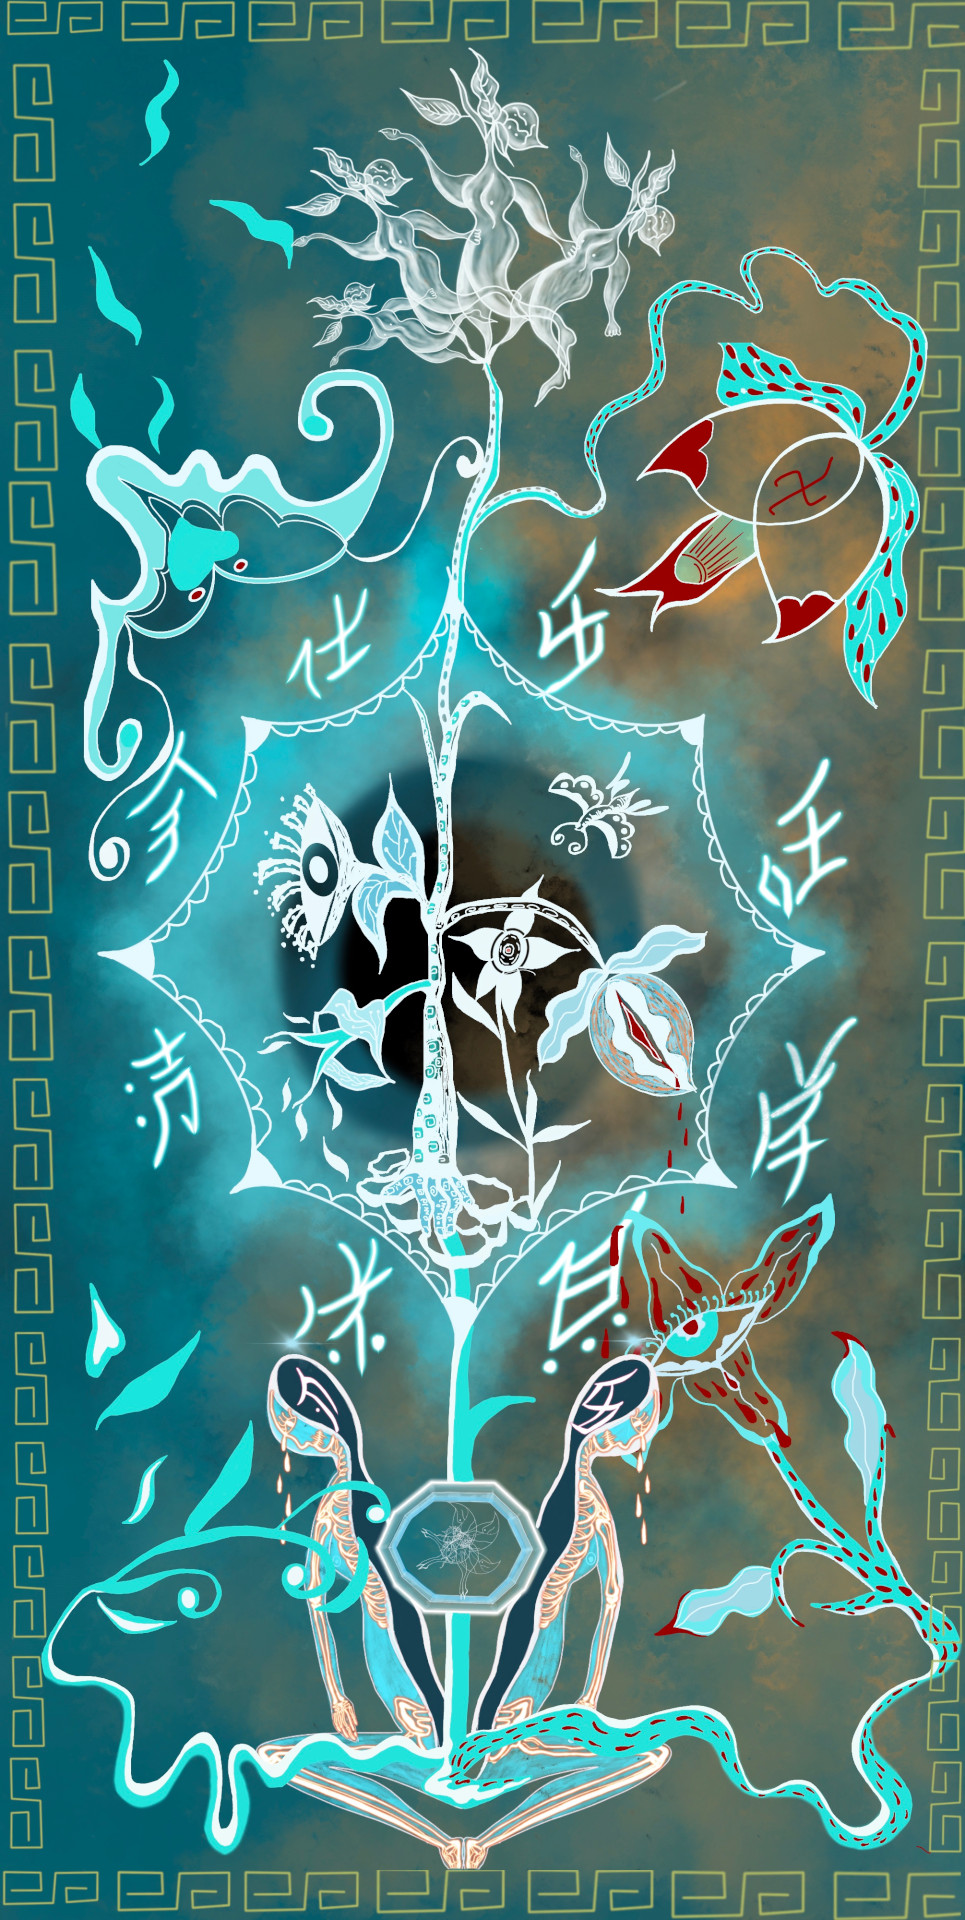 Blue and white Chinese-style artwork of plants growing from split body